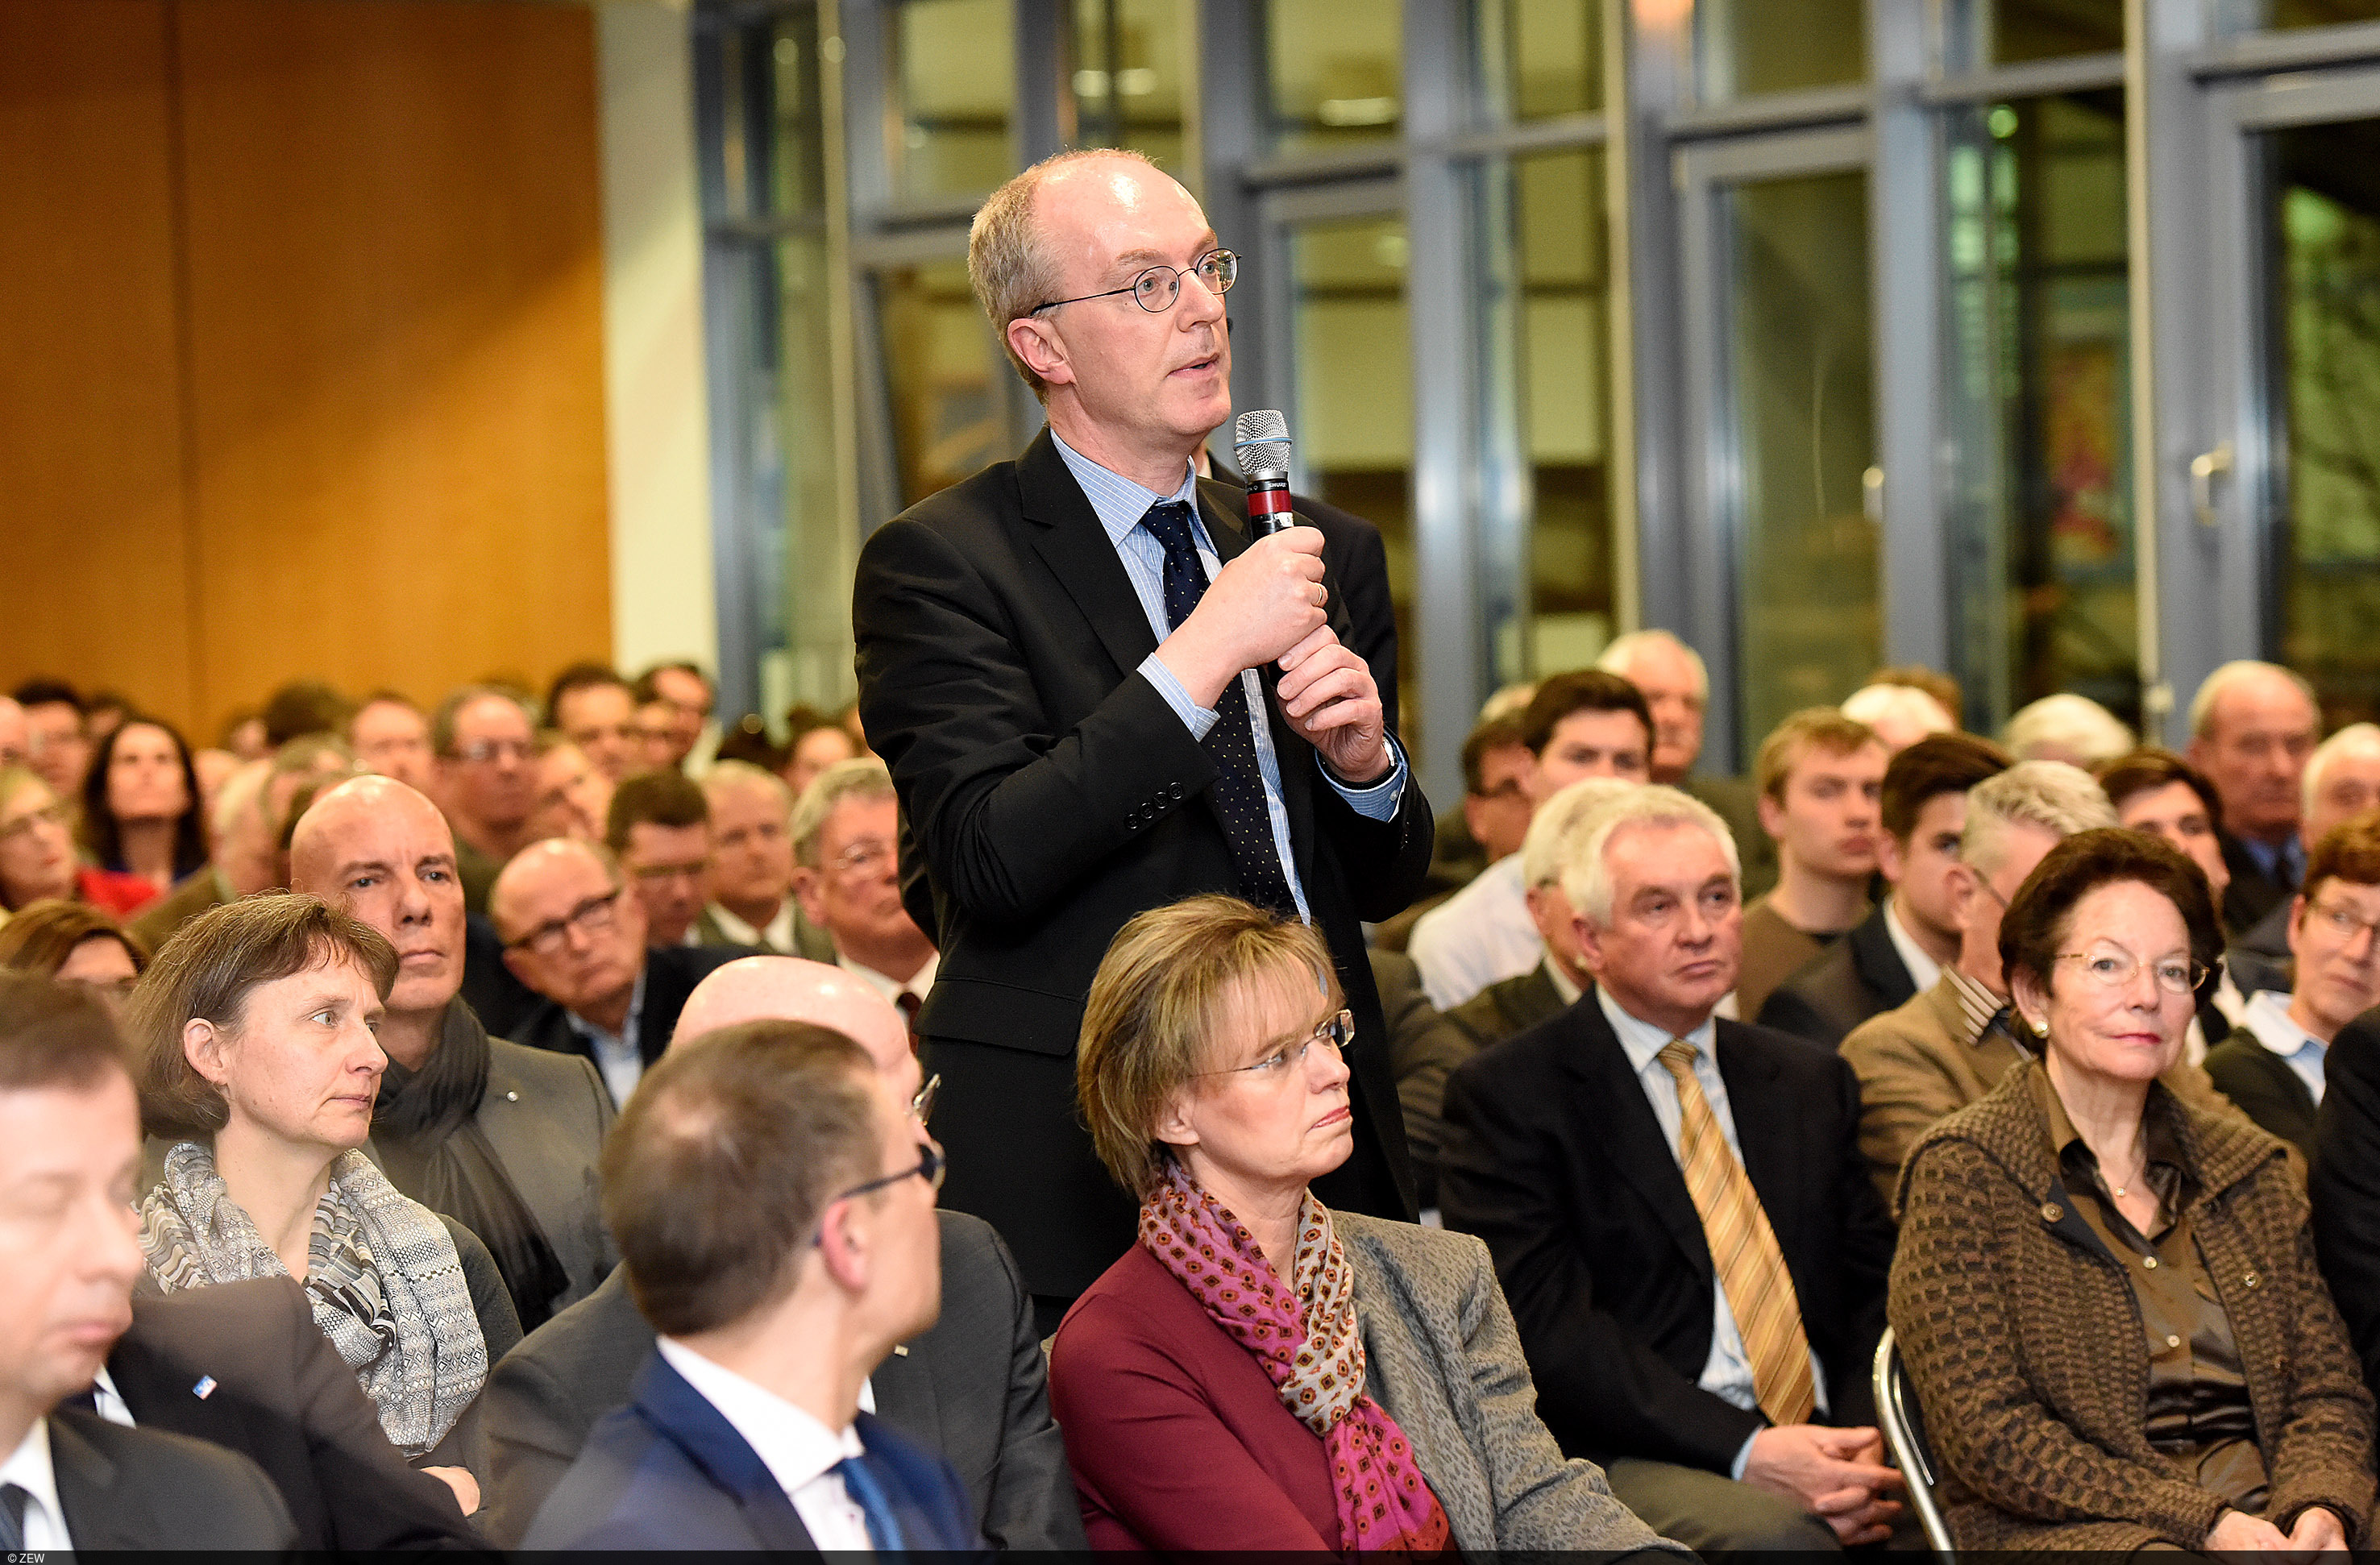 Professor Friedrich Heinemann, Head of Research at the ZEW, poses a audience question